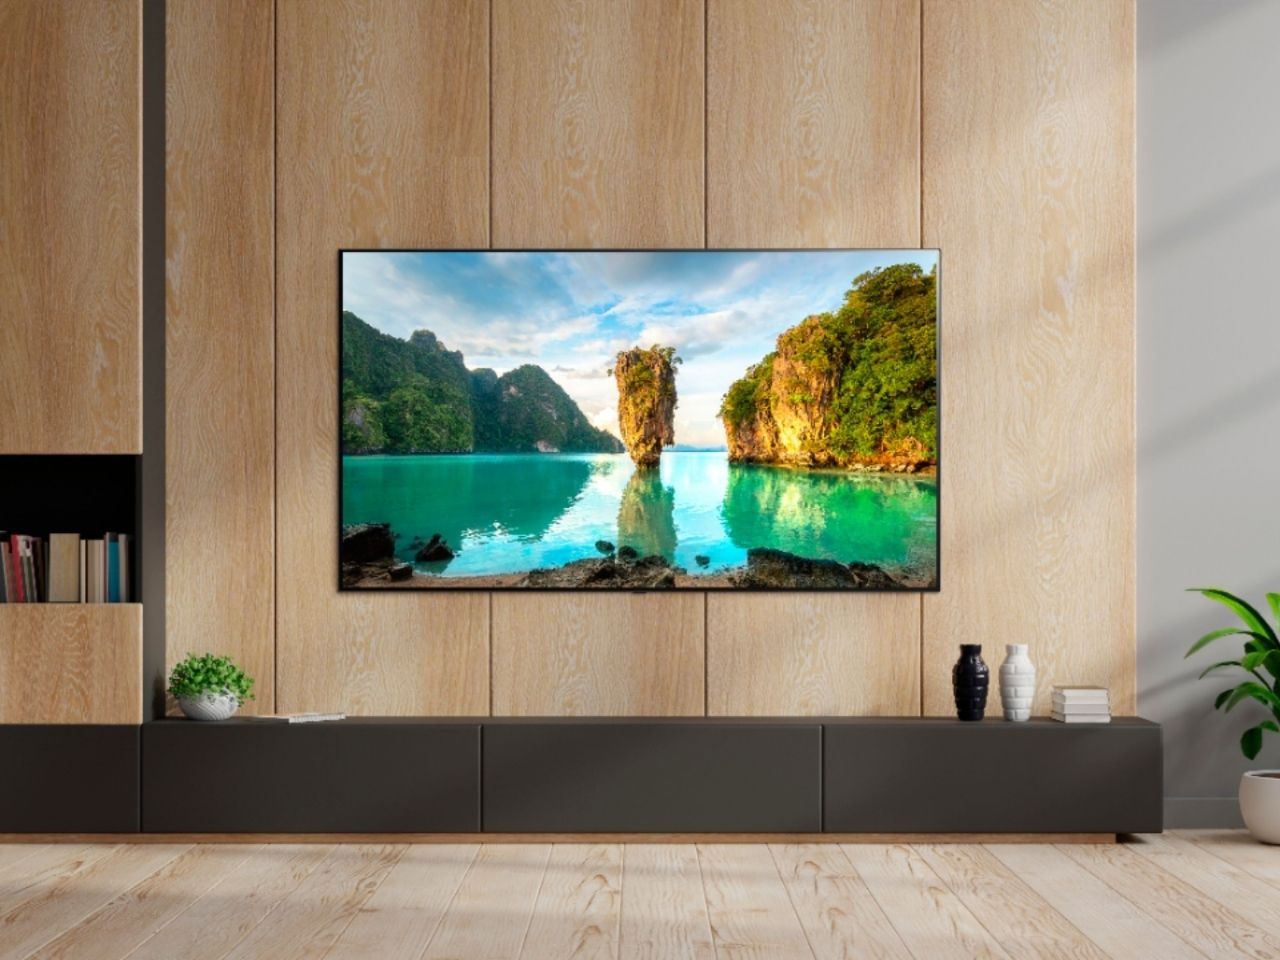 How to Measure a TV so You Buy the Right Size